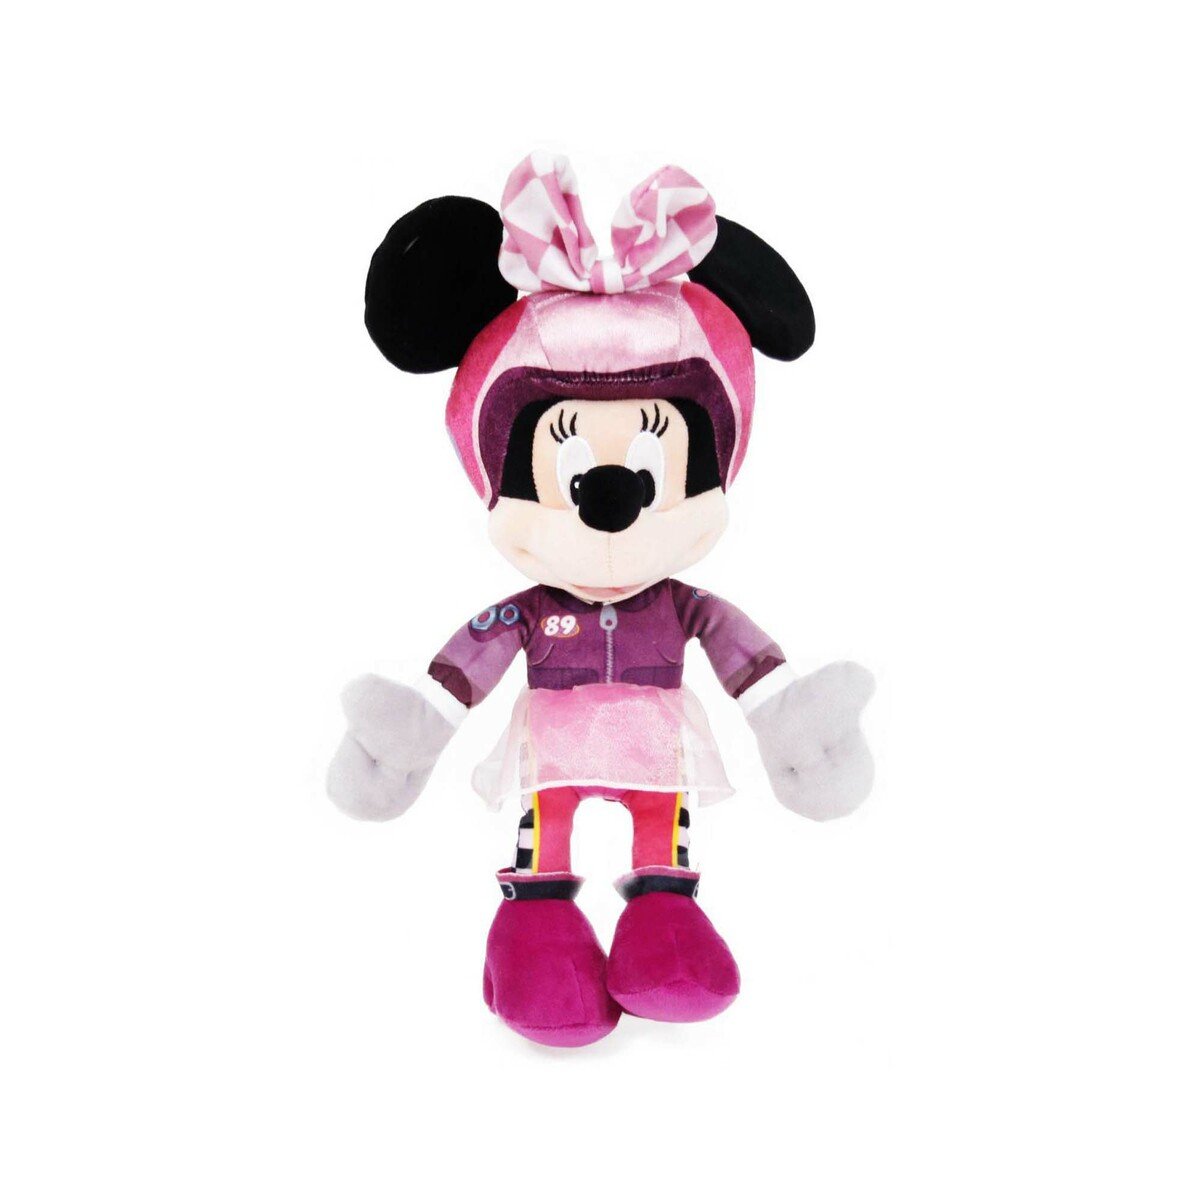 Minnie Figure With Racing Outfit 10" 1601259